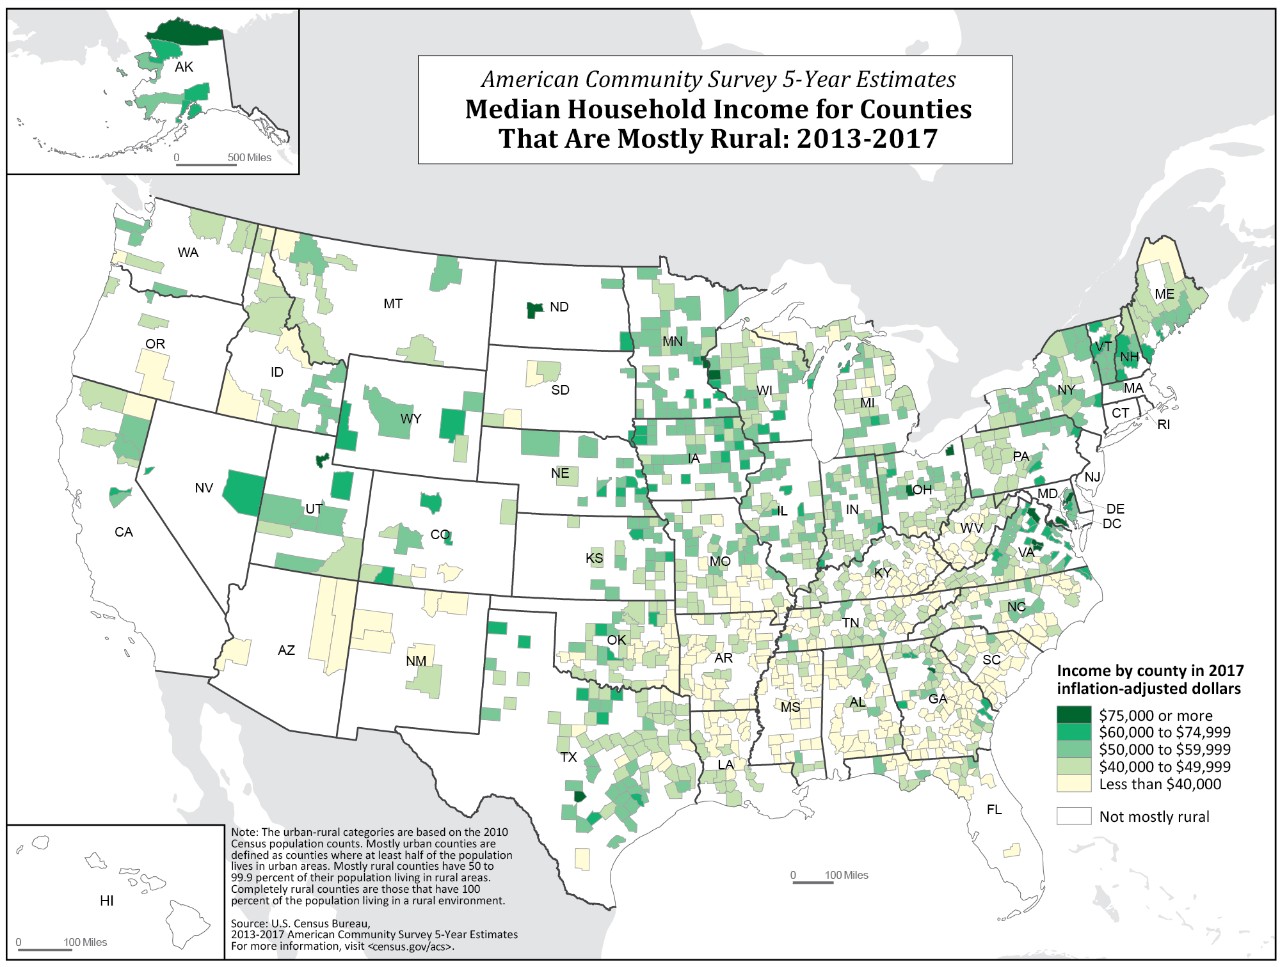 Median Household Income for Counties That Are Mostly Rural: 2013-2017